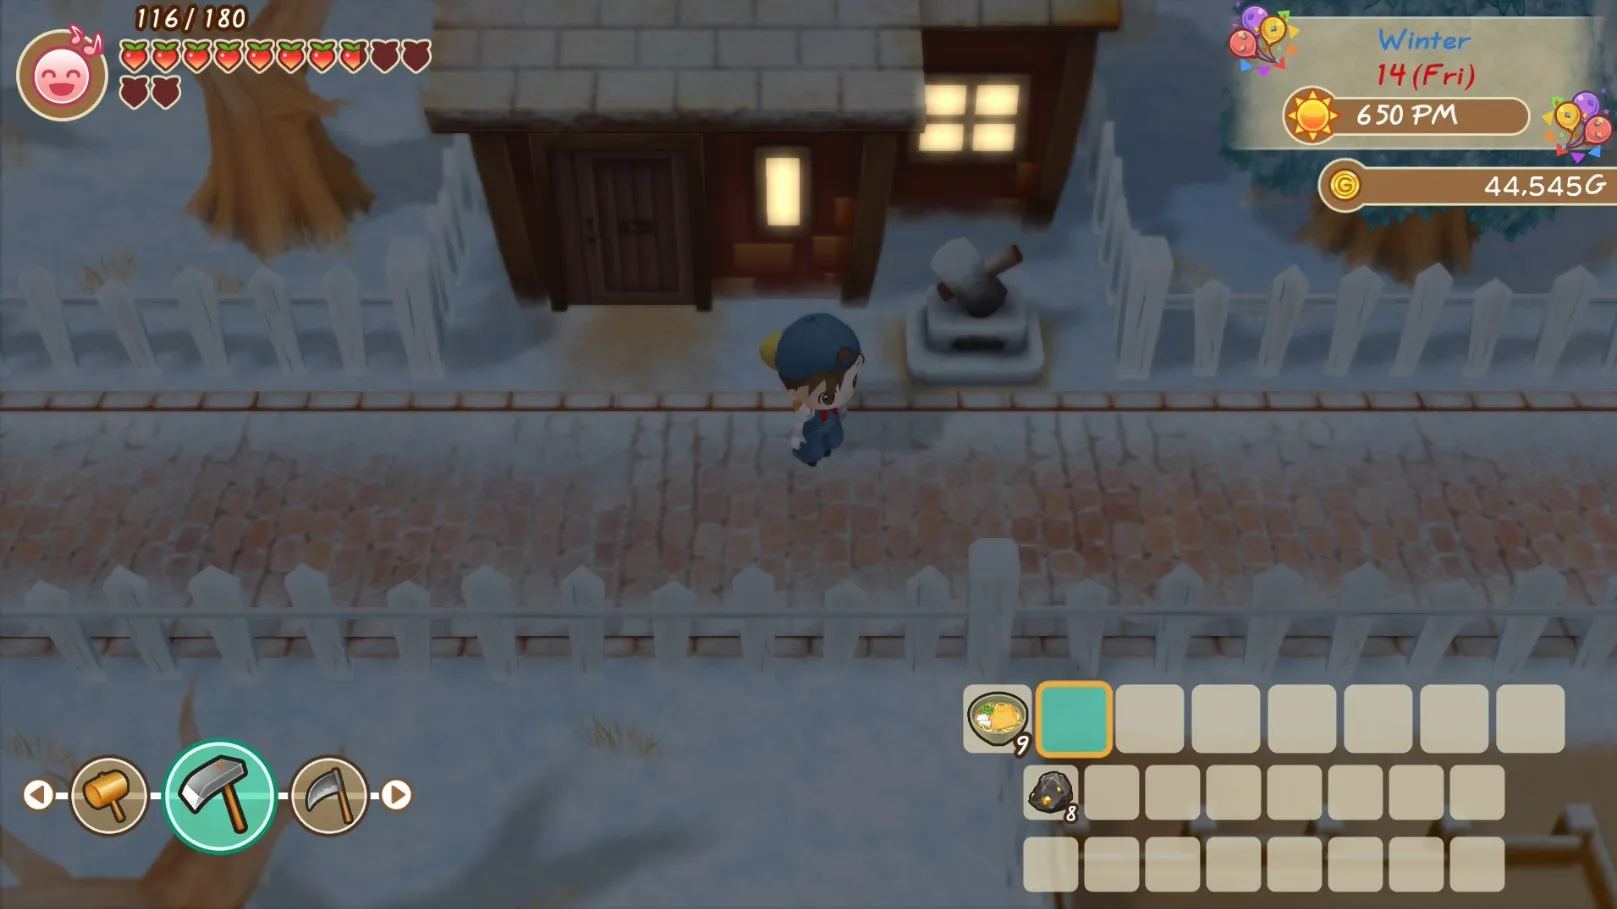  How to level up and upgrade your tools in Story of Seasons: Friends of Mineral Town 